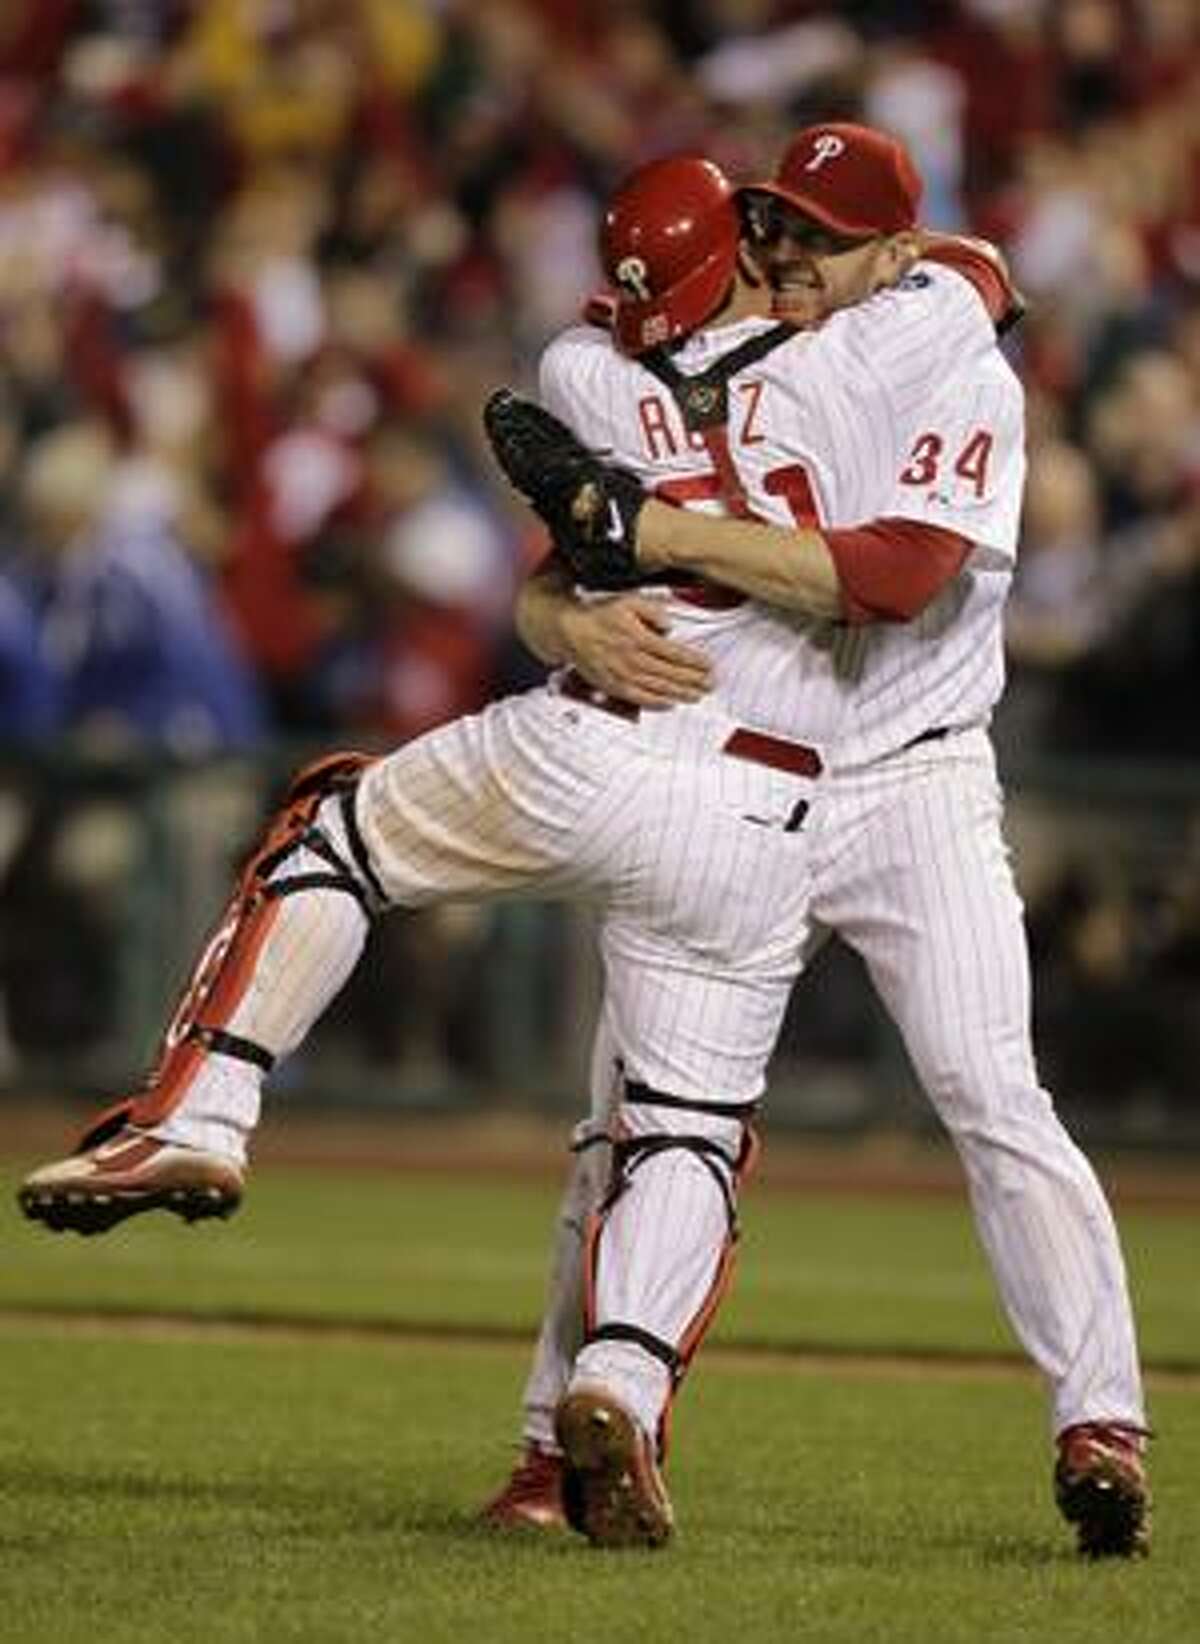 Philadelphia Phillies starting pitcher Roy Halladay celebrates with catcher Carlos Ruiz (51) after throwing a no-hitter to defeat the Cincinnati Reds 4-0 during Game 1 of baseball's National League Division Series Wednesday, Oct. 6, 2010, in Philadelphia. (AP Photo/Rob Carr)